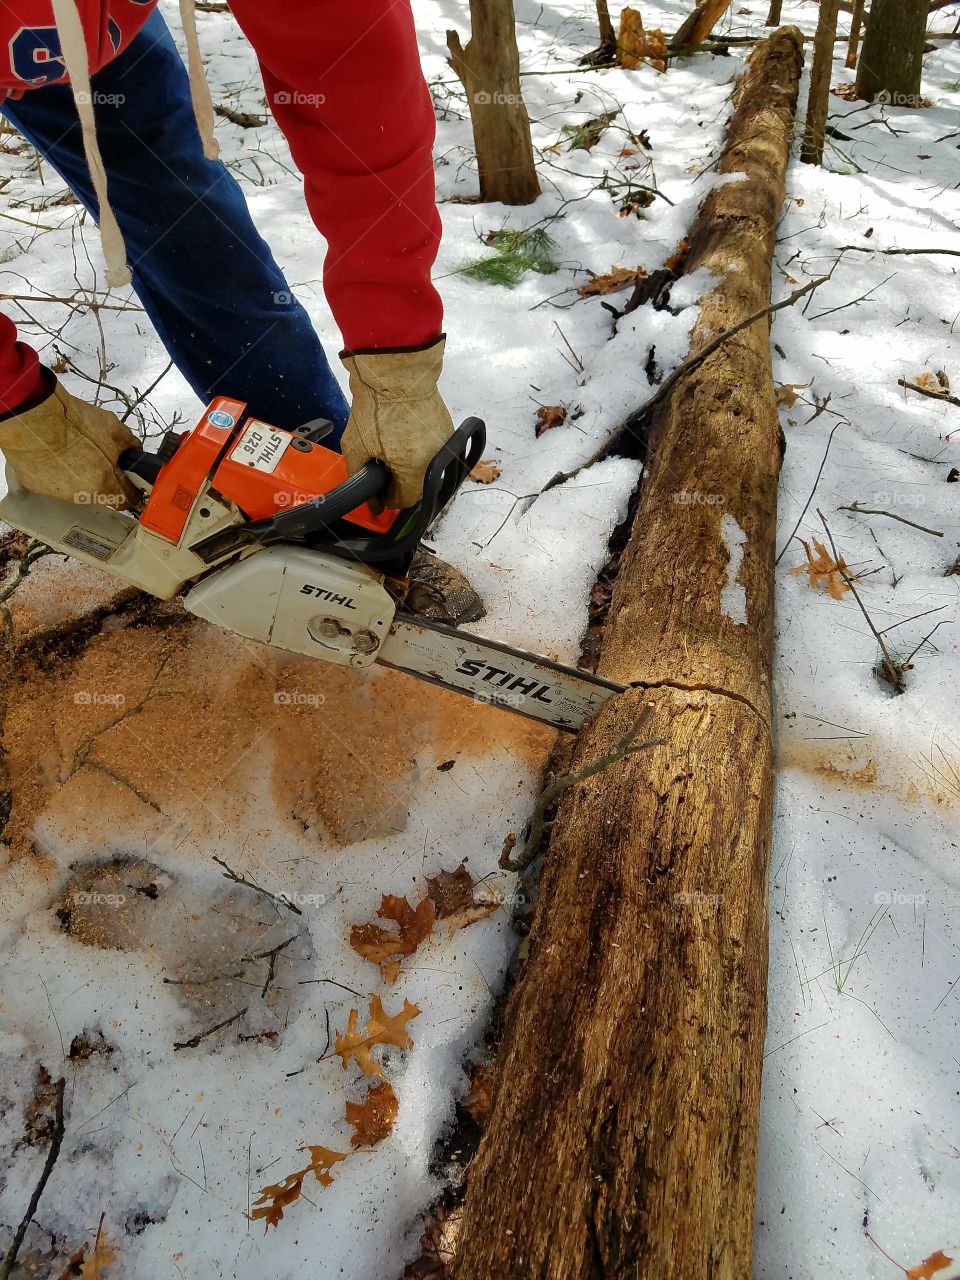 Wood cutter using older Stihl Gas Chainsaw. Pic shows saw running, cutting dead tree fallen during snowstorm.